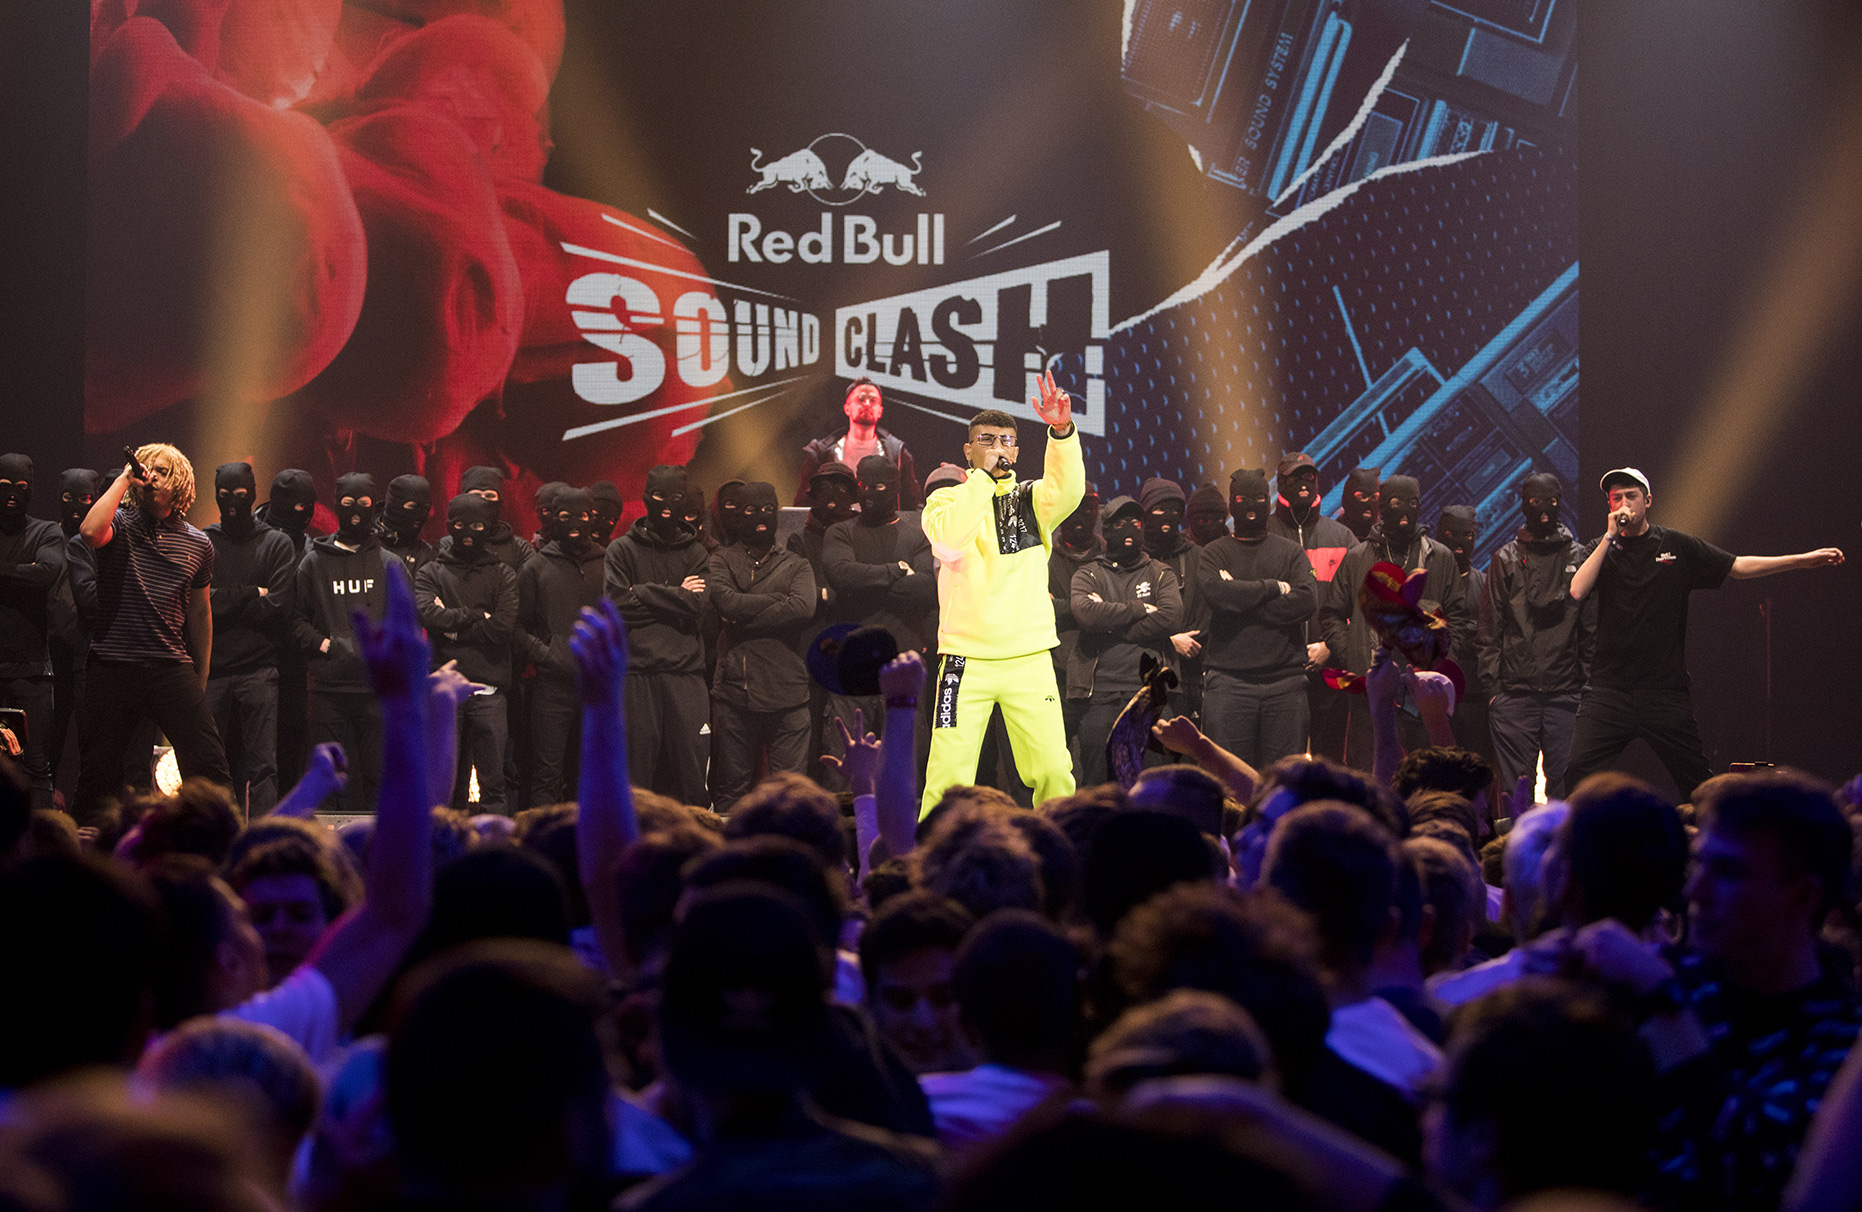 © Dirk Mathesius, CRACK IGNAZ, SOUFIAN & LGOONY is performing at Red Bull Sound Clash Stage, CRACK IGNAZ, LGOONY, SOUFIAN/ Team New Level VS. SAMY DELUXE, EKO FRESH, AFROB/ Team Reality Check, Client Red Bull, Hamburg